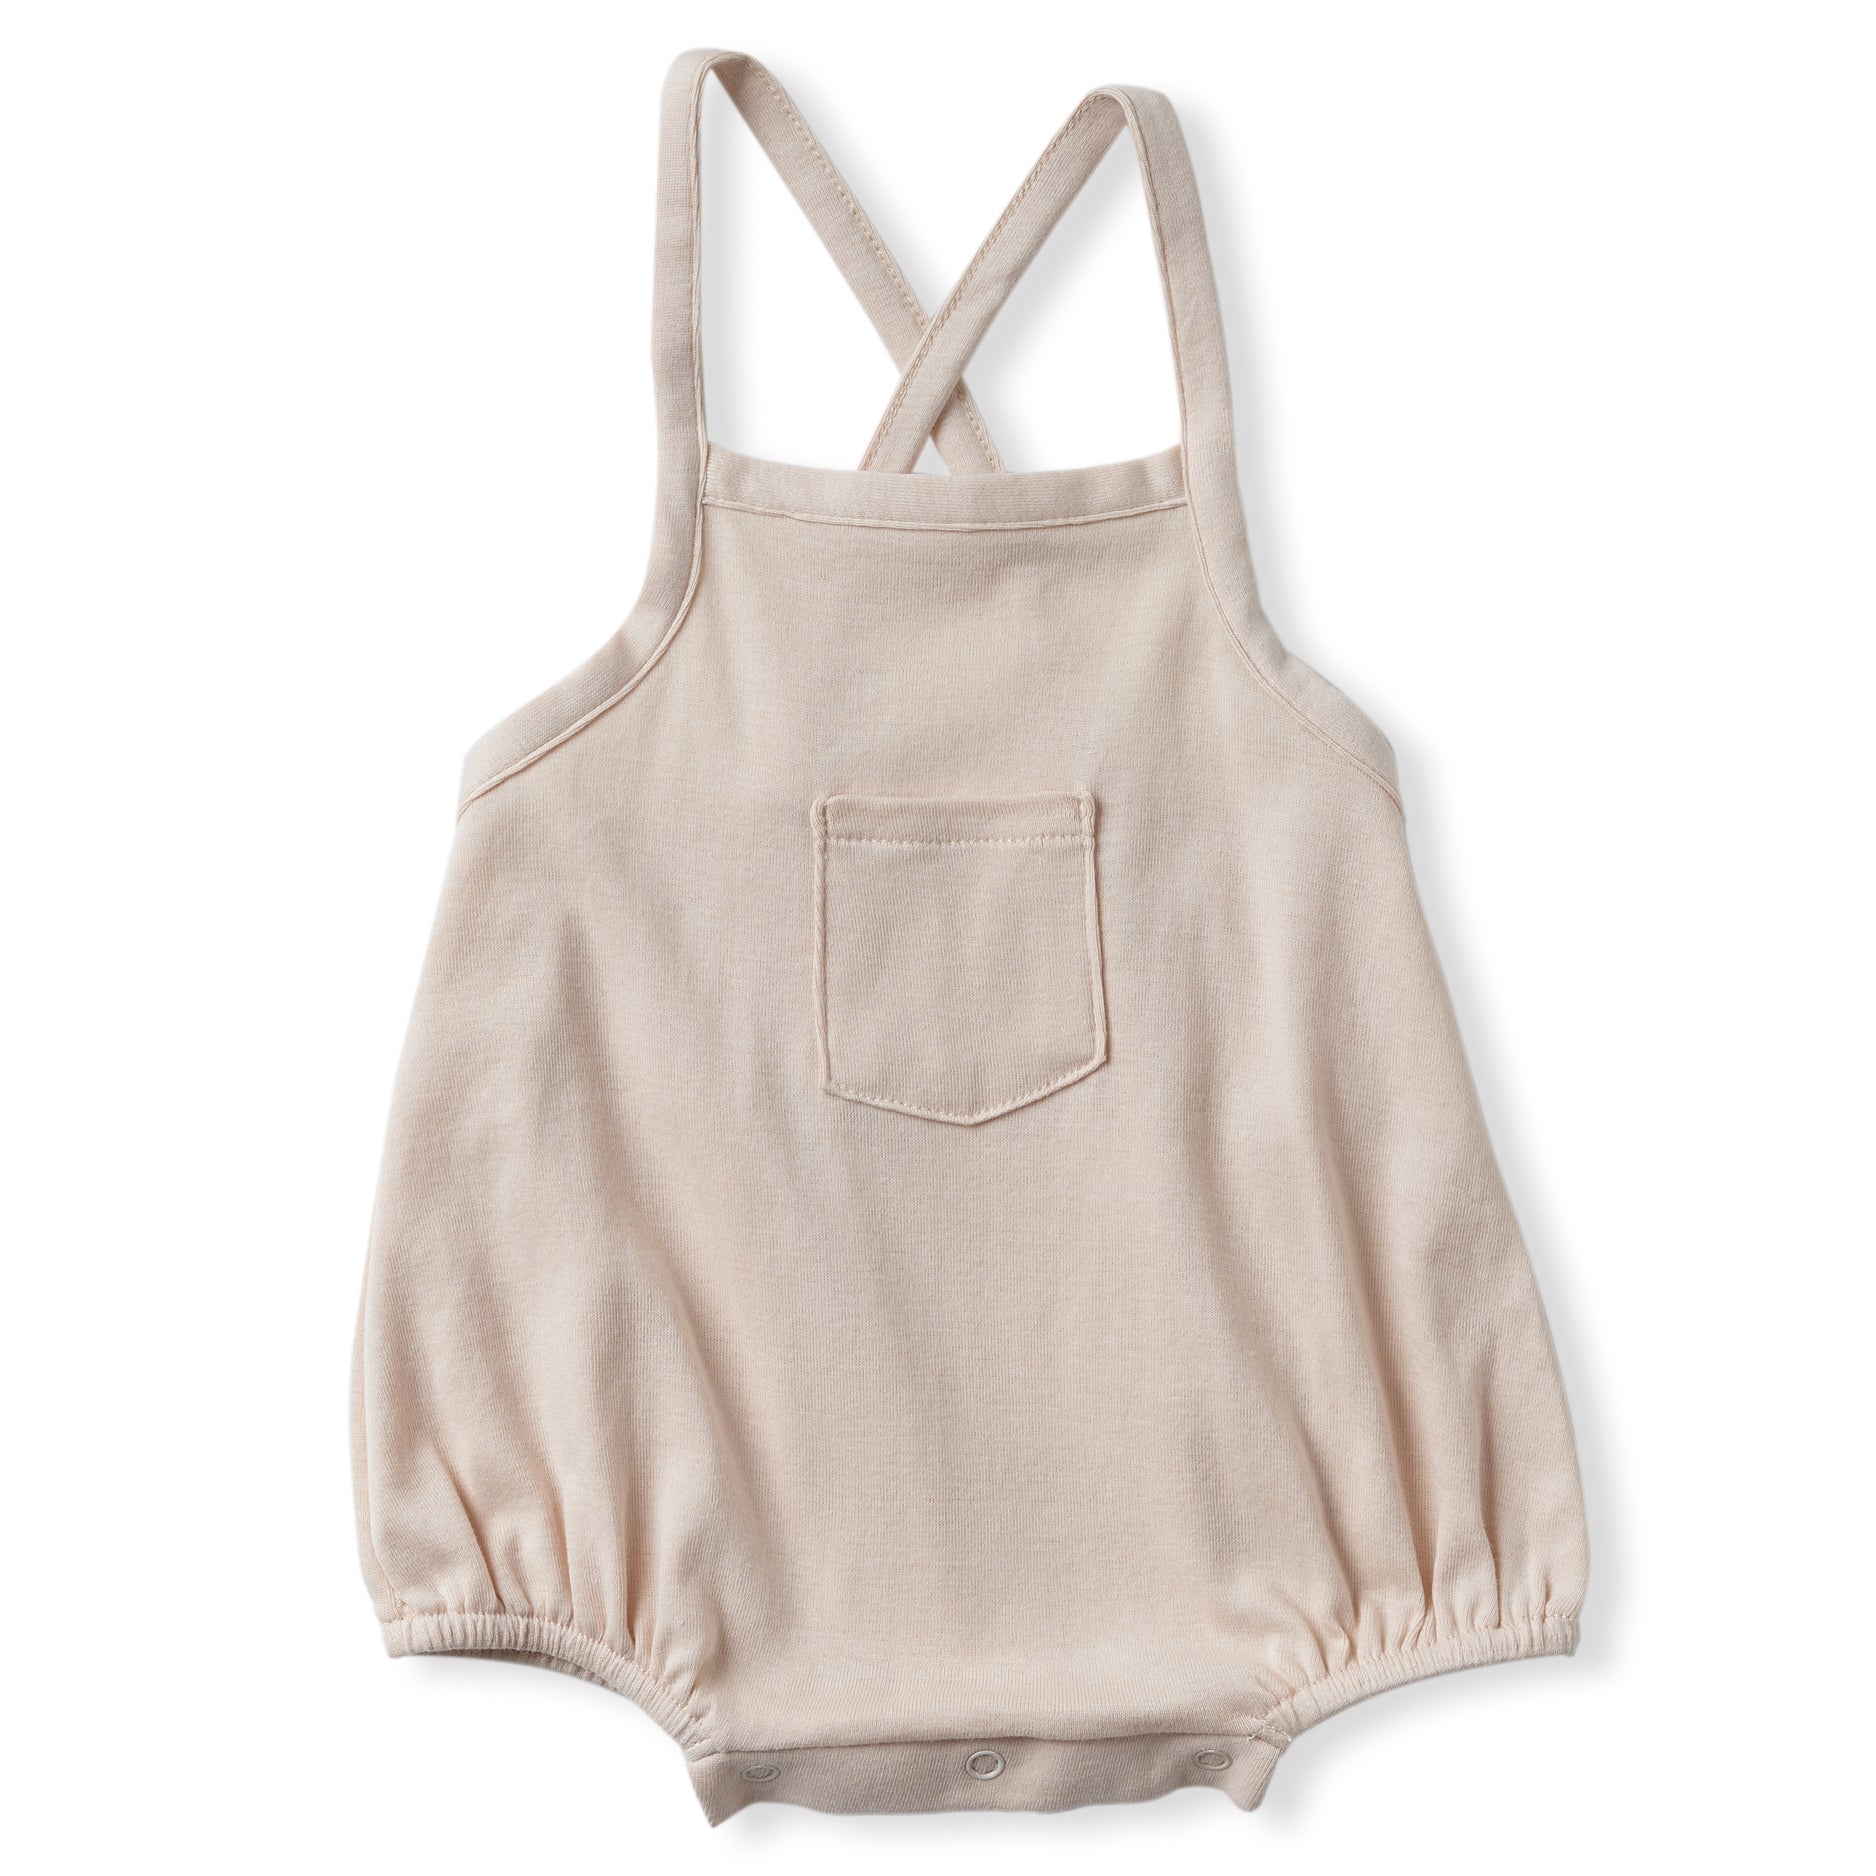 ivory color cross back tank romper with one front pocket and soft encased elastics at leg opening.  100% organic pima cotton ribbed knit.